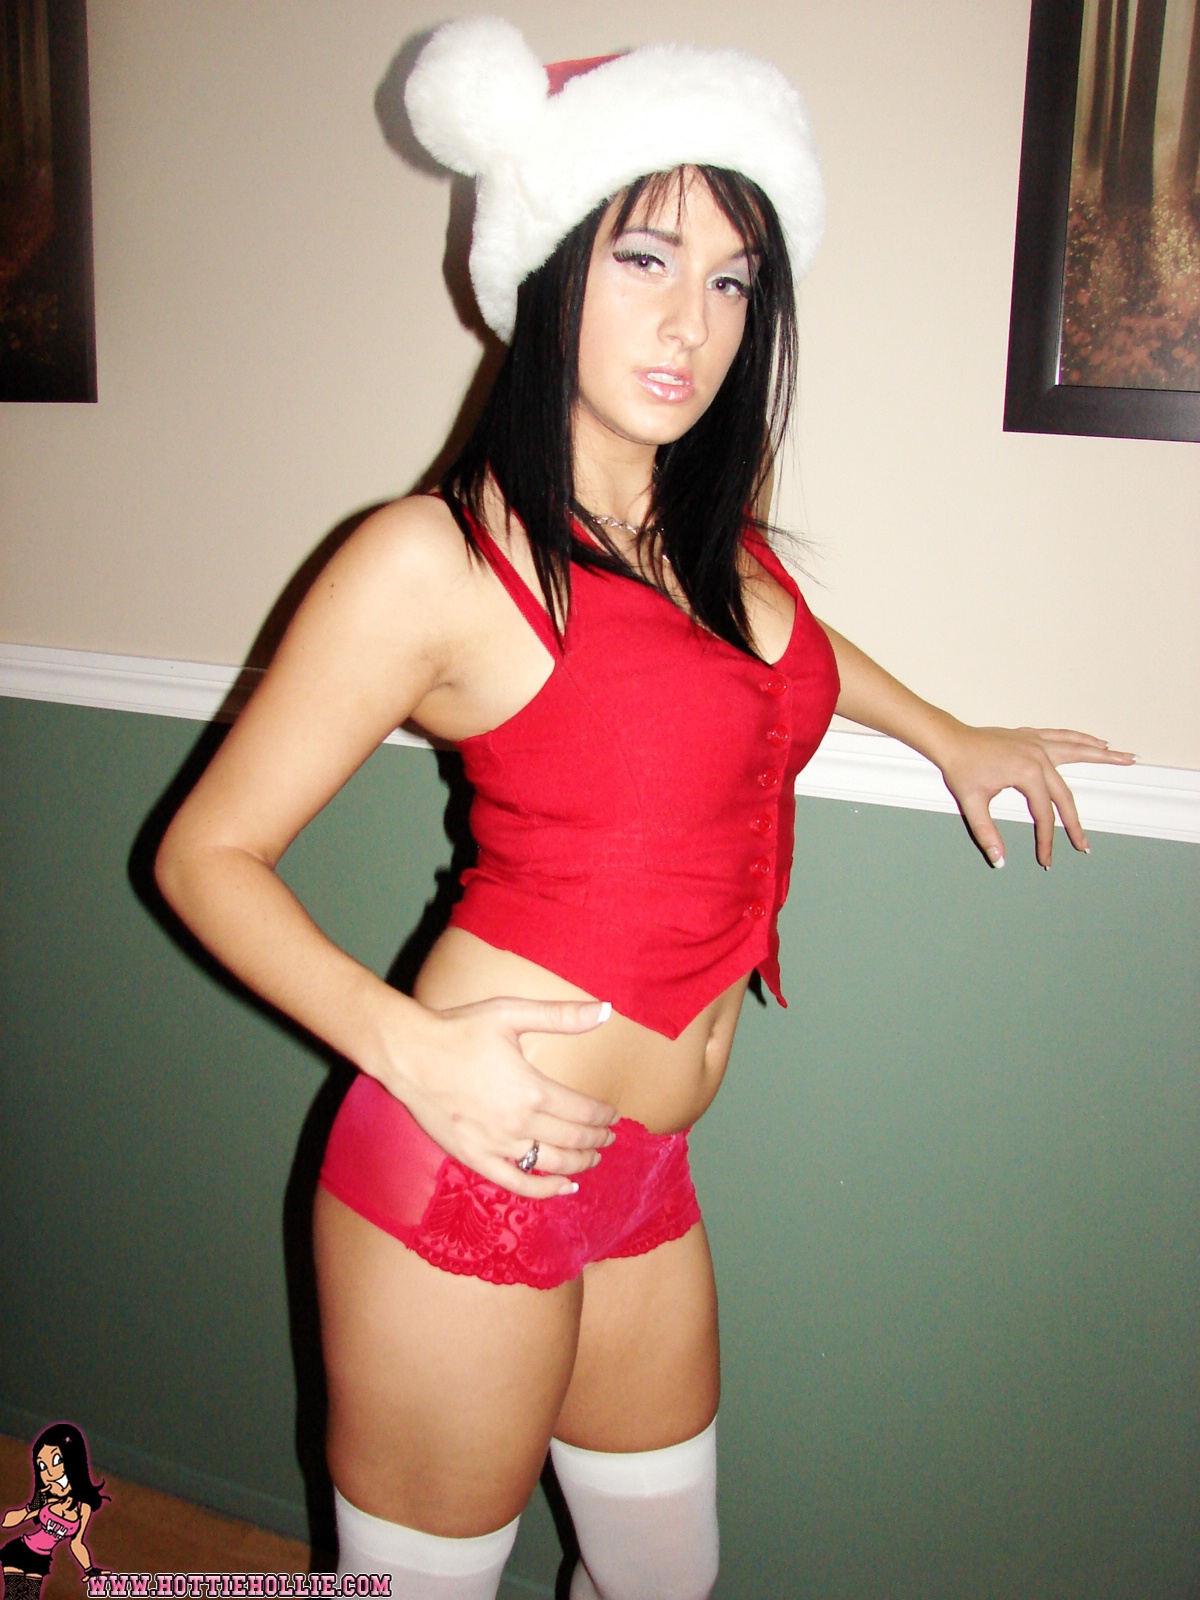 Hottie Hollie Christmas Hottie Hottie Hollie Posing In Her Christmas Outfit And Undressing 419768